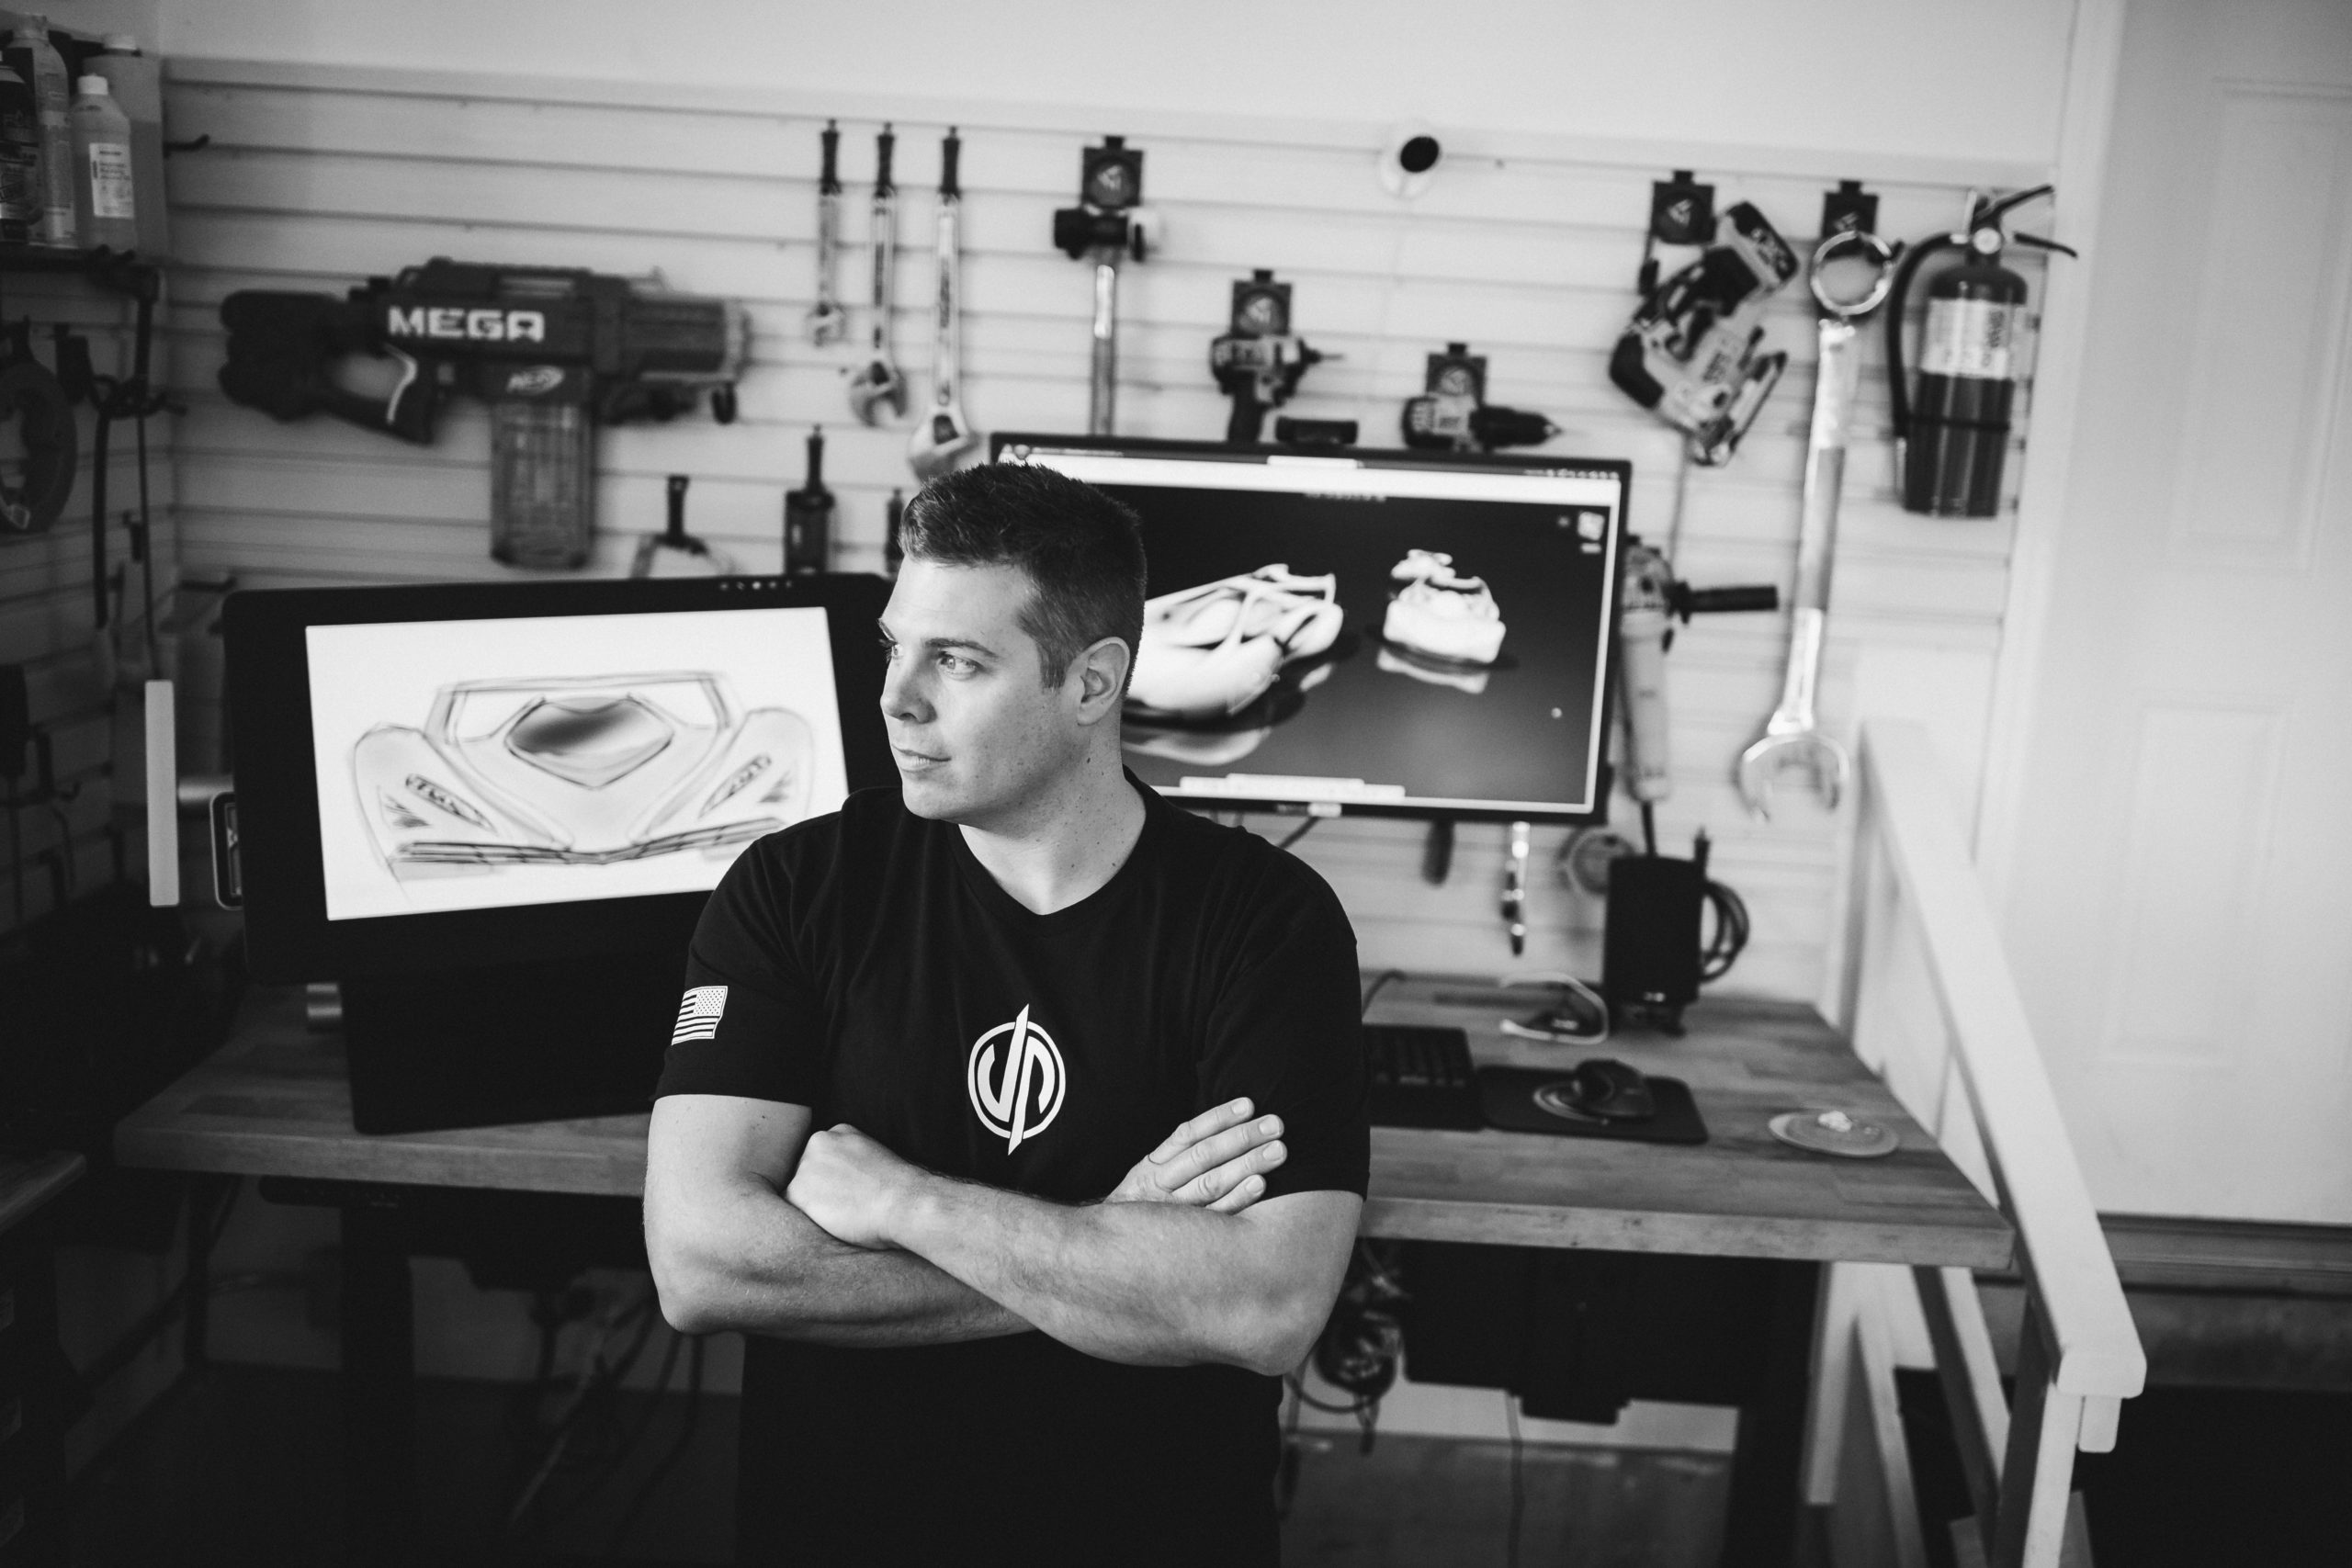 Jason Pohl in his home workshop